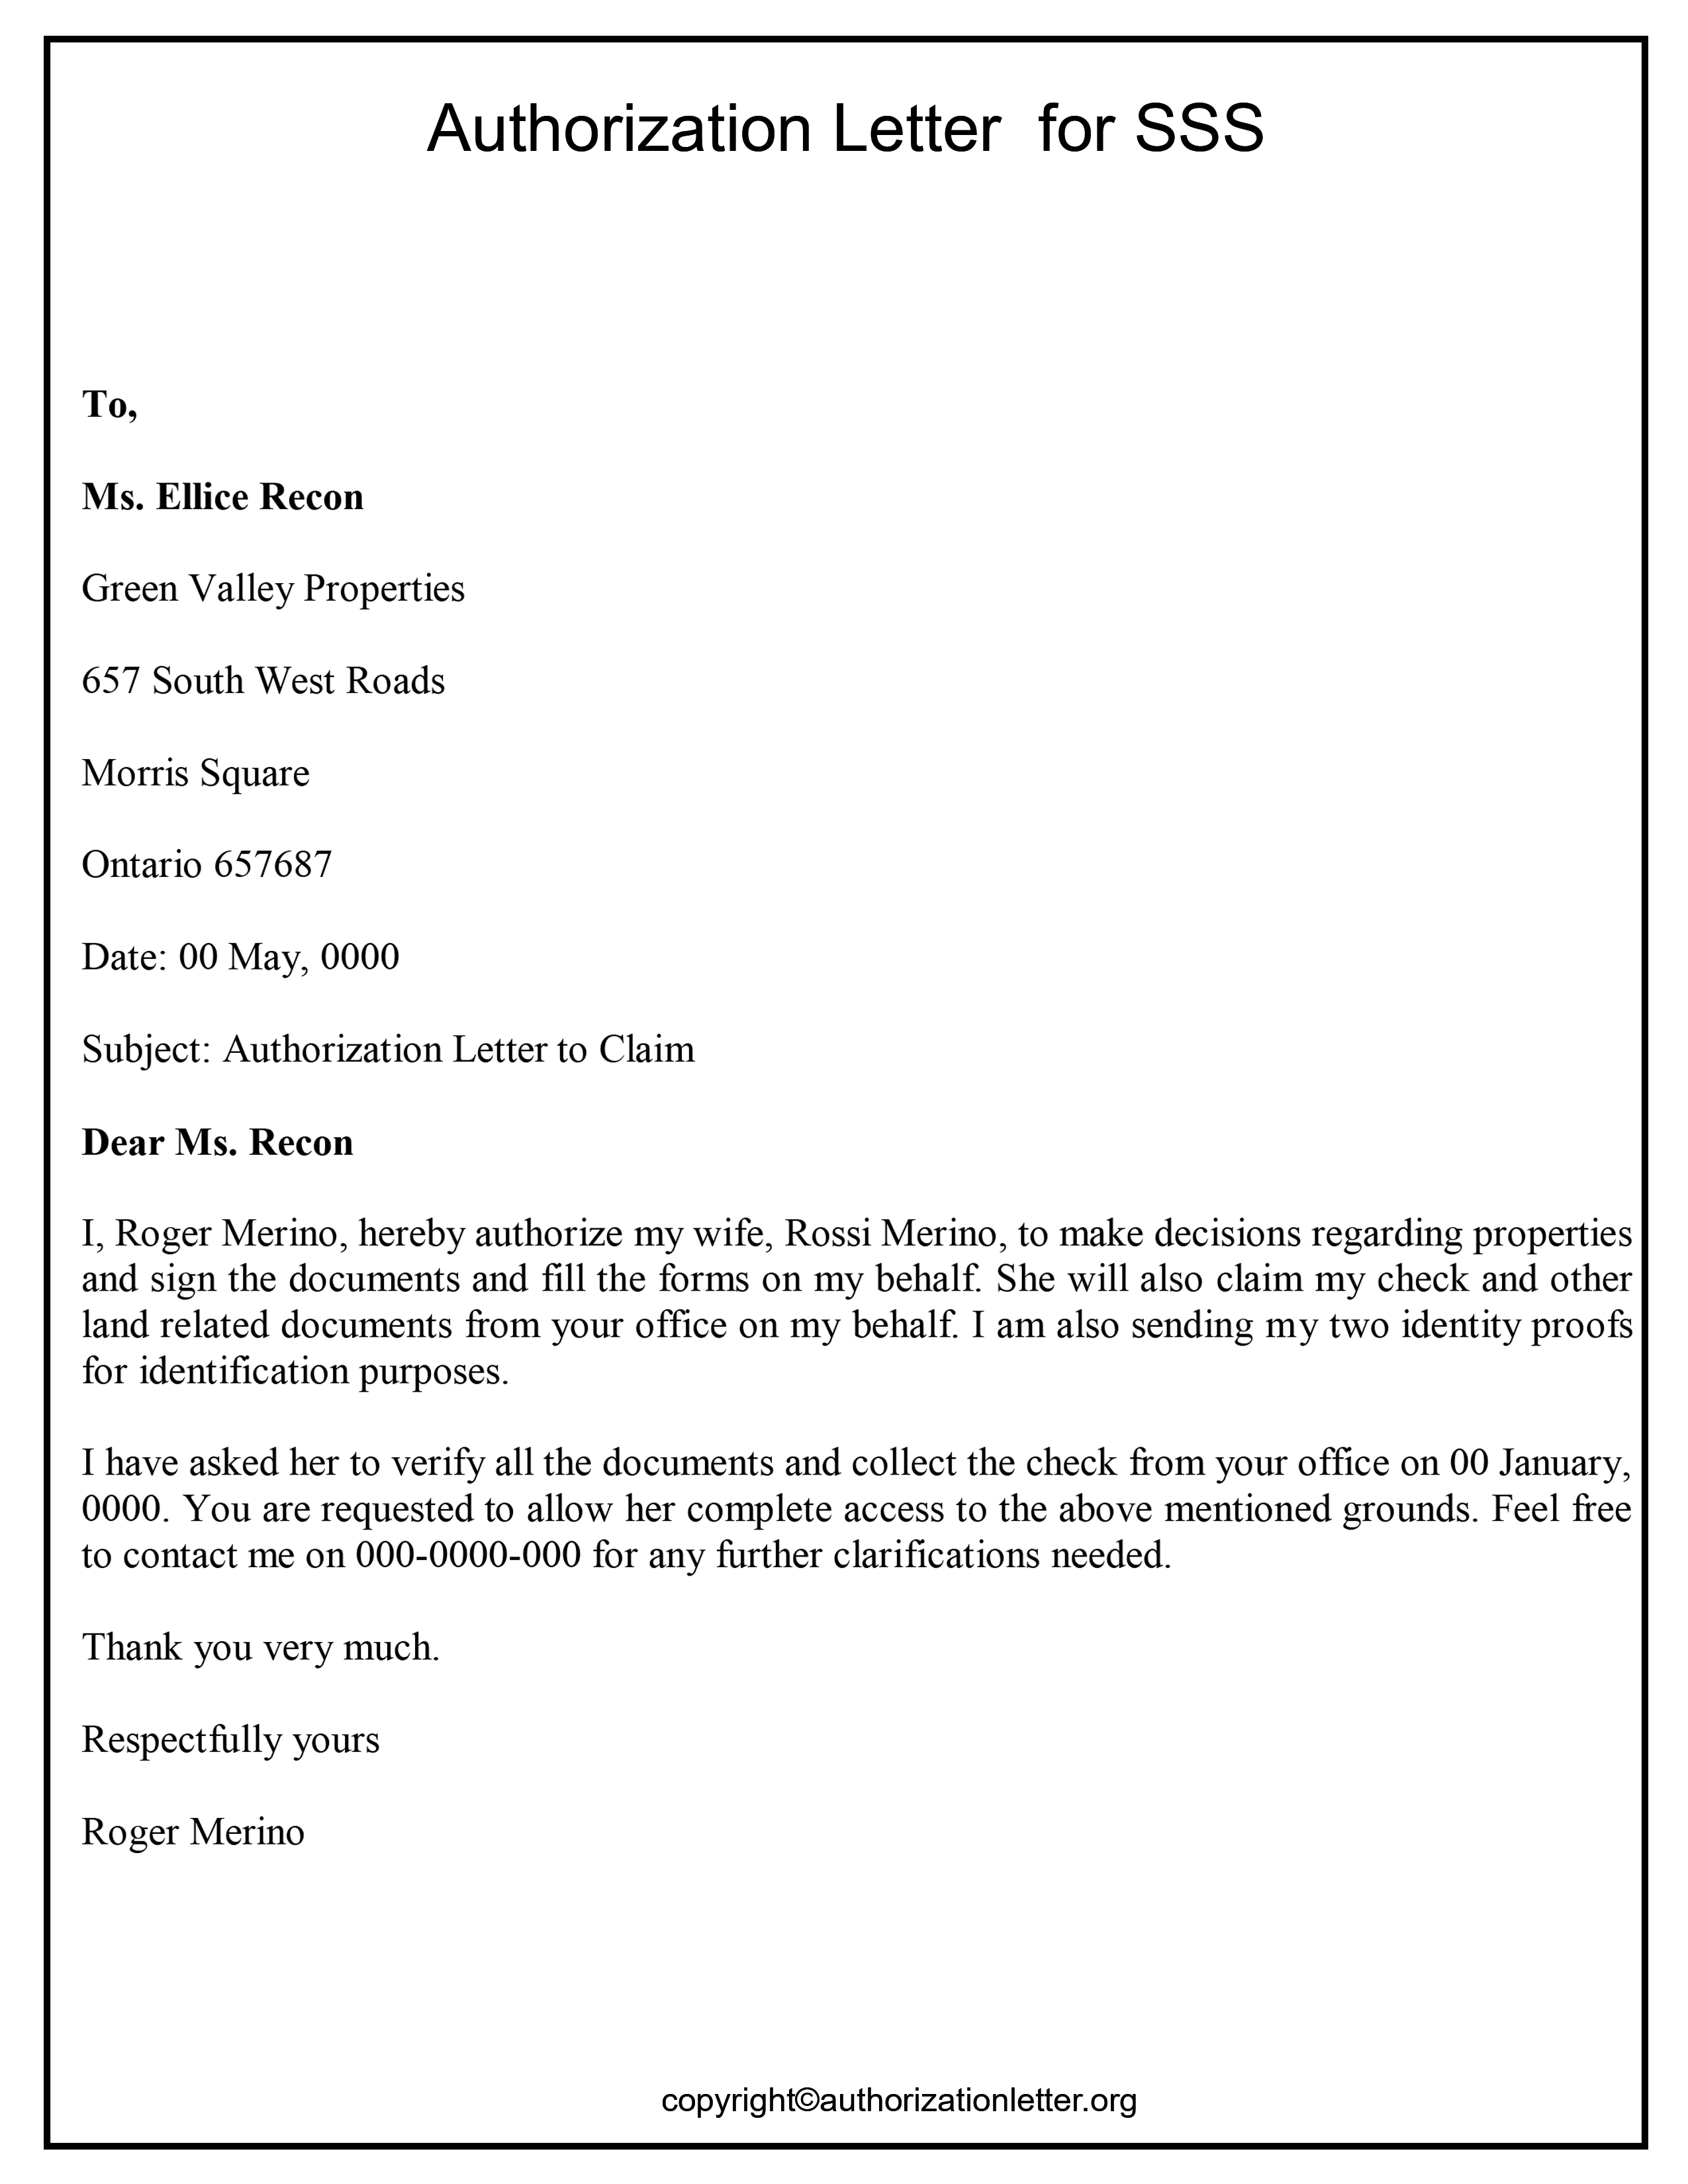 Authorization Letter Format for SSS